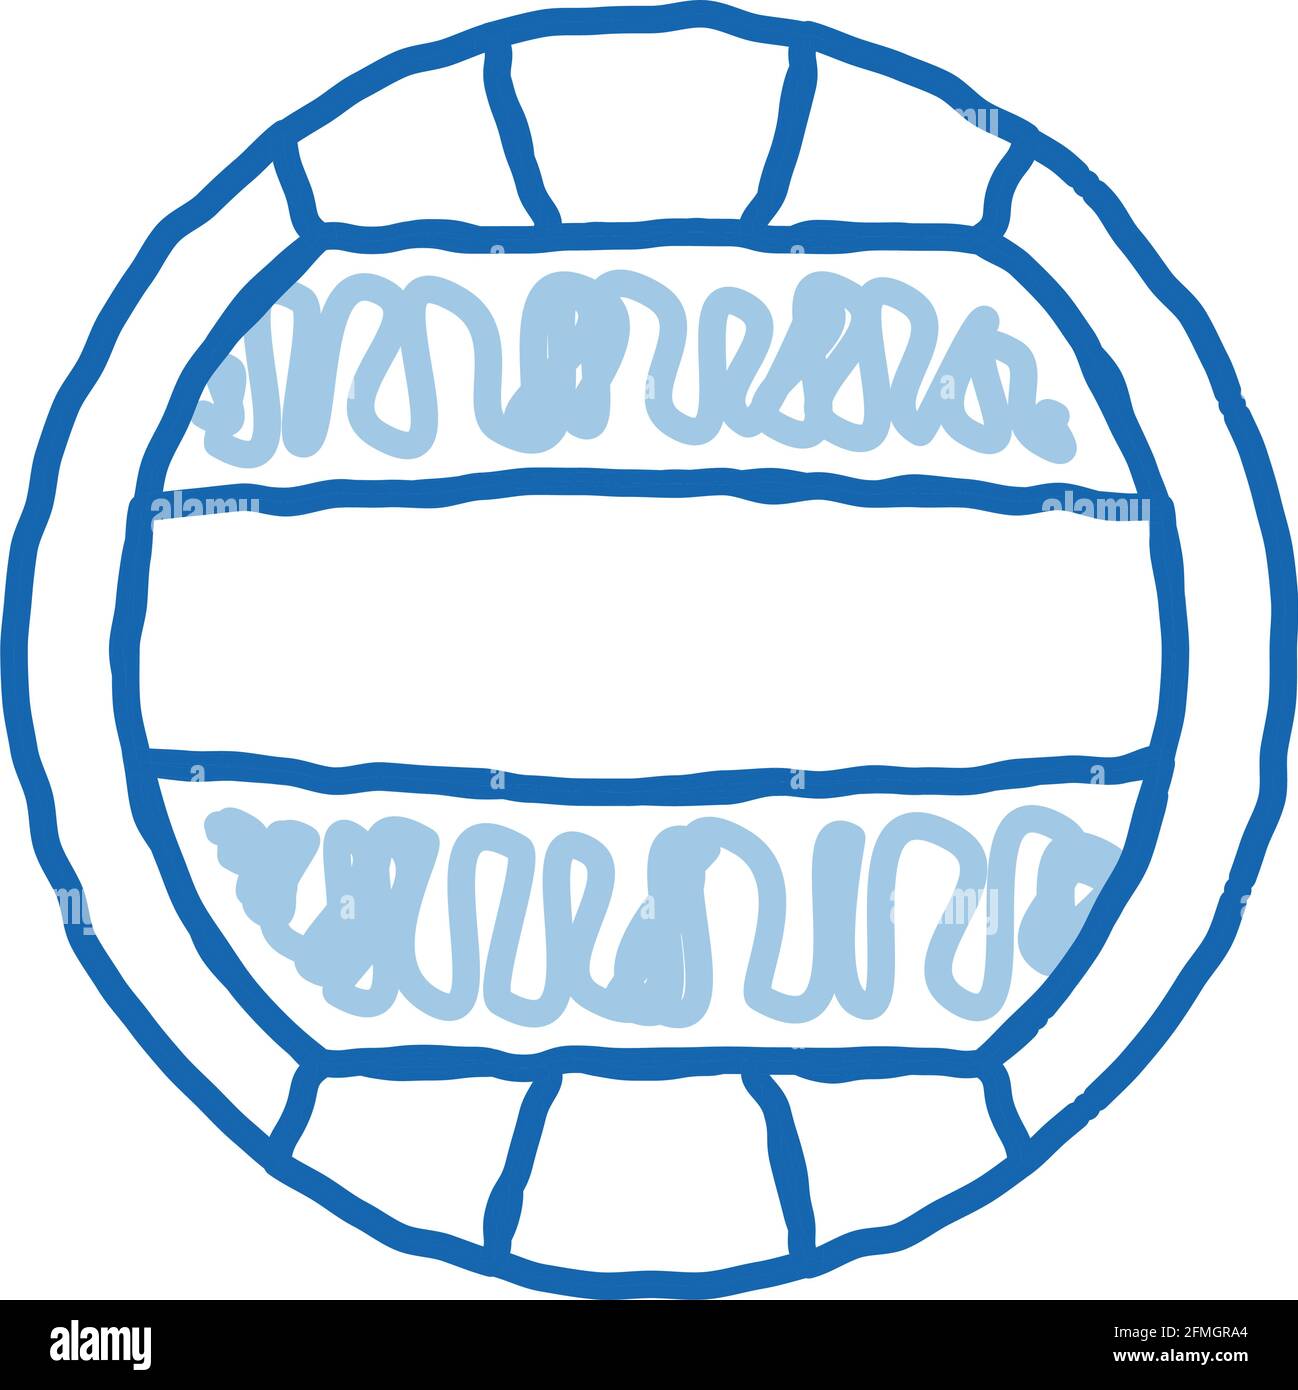 Volleyball doodle icon hand drawn illustration Stock Vector